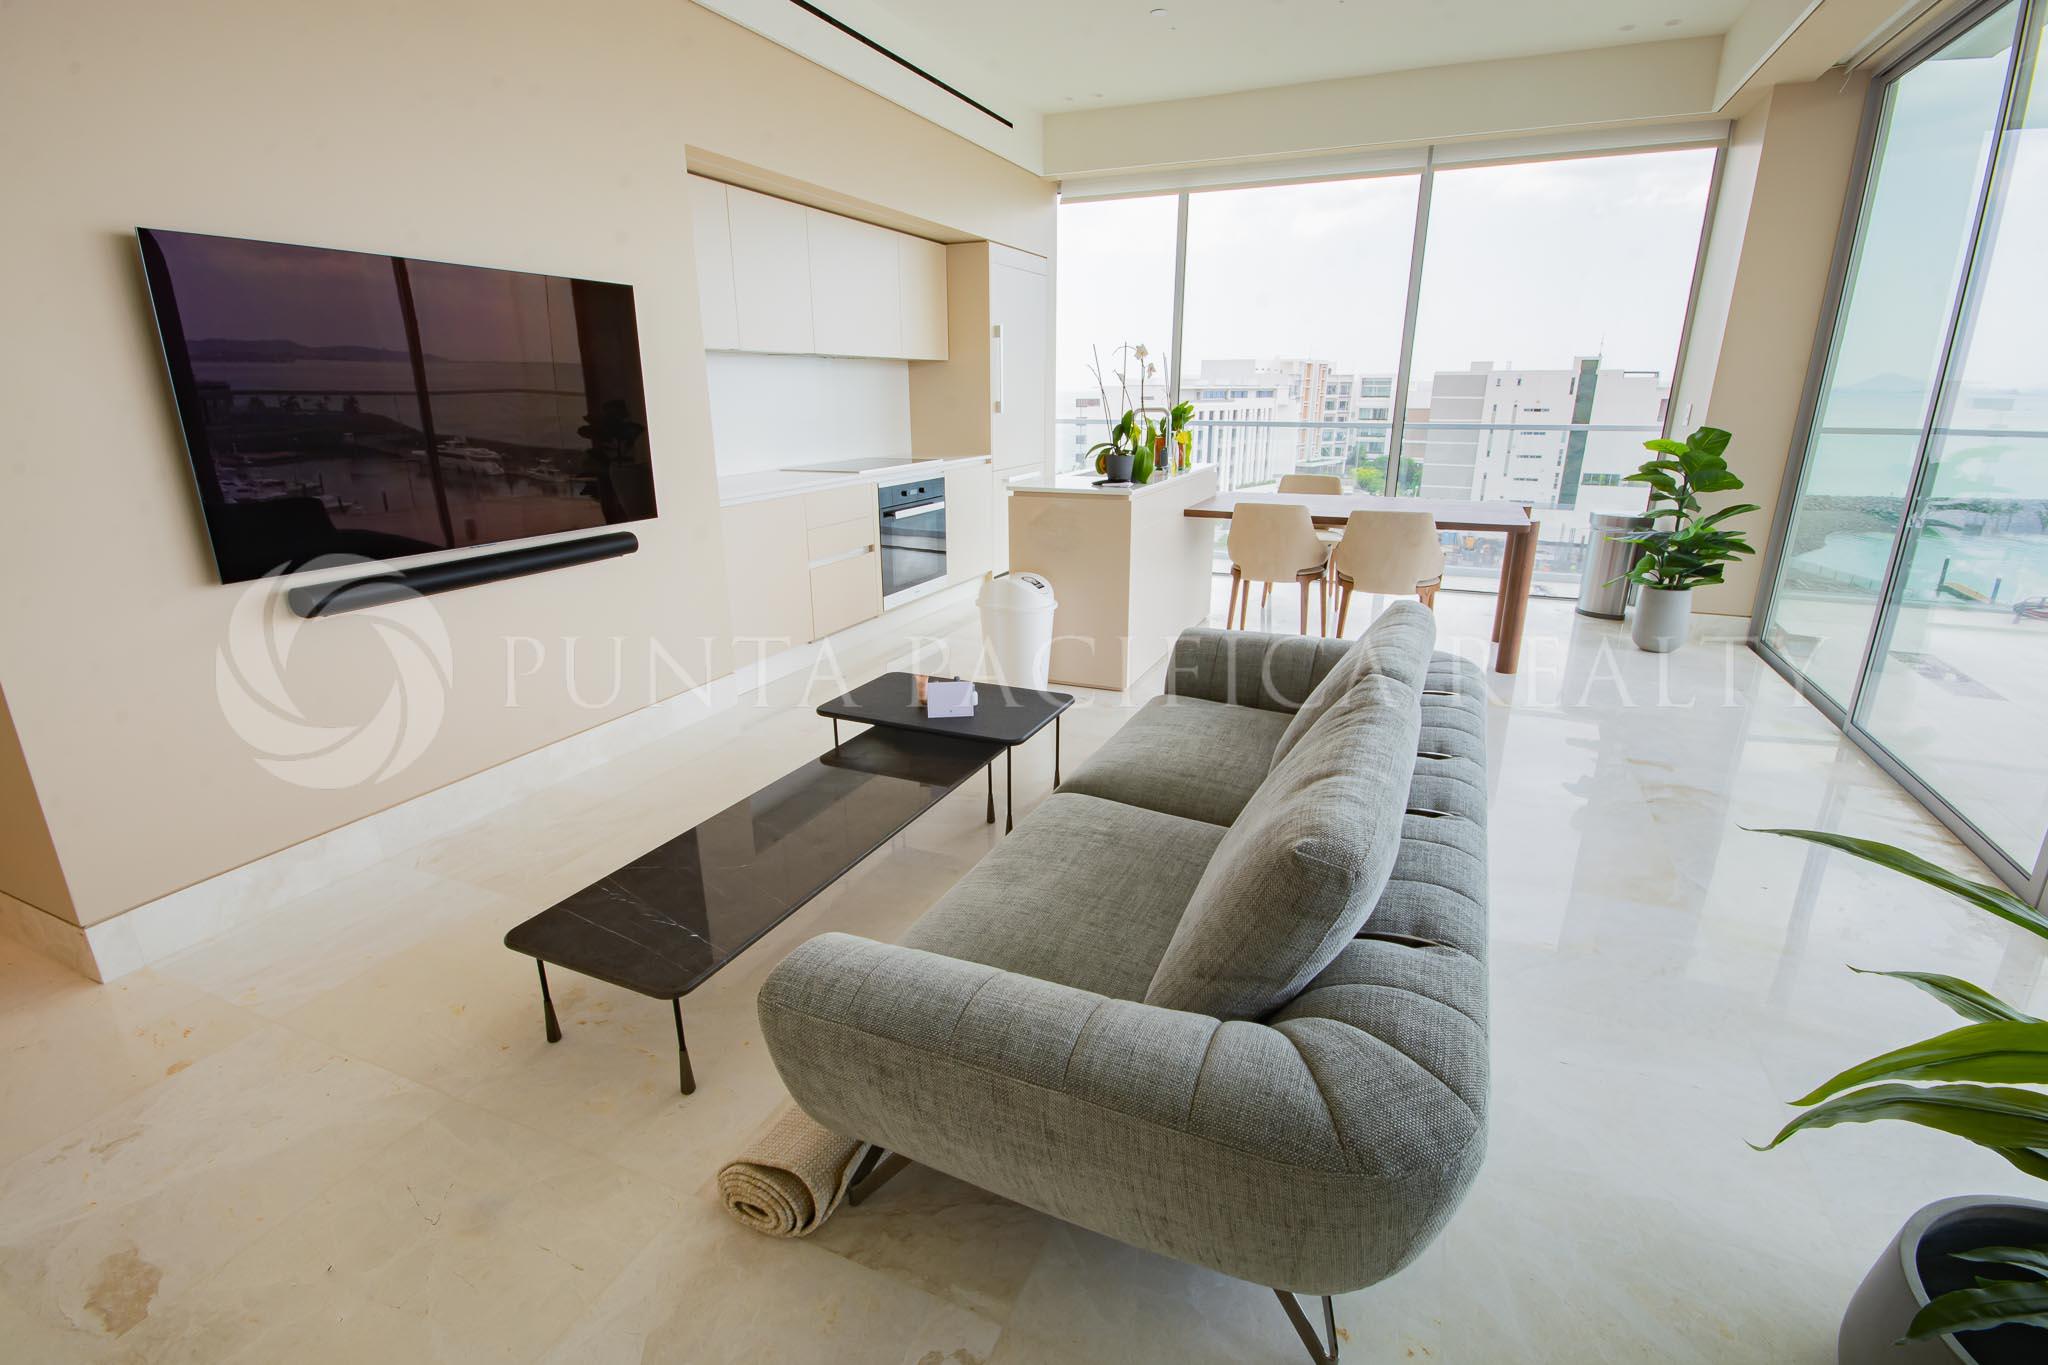 Rented | Breathtaking View | Private Island | 1-Bedroom apartment in Beach Club Residences